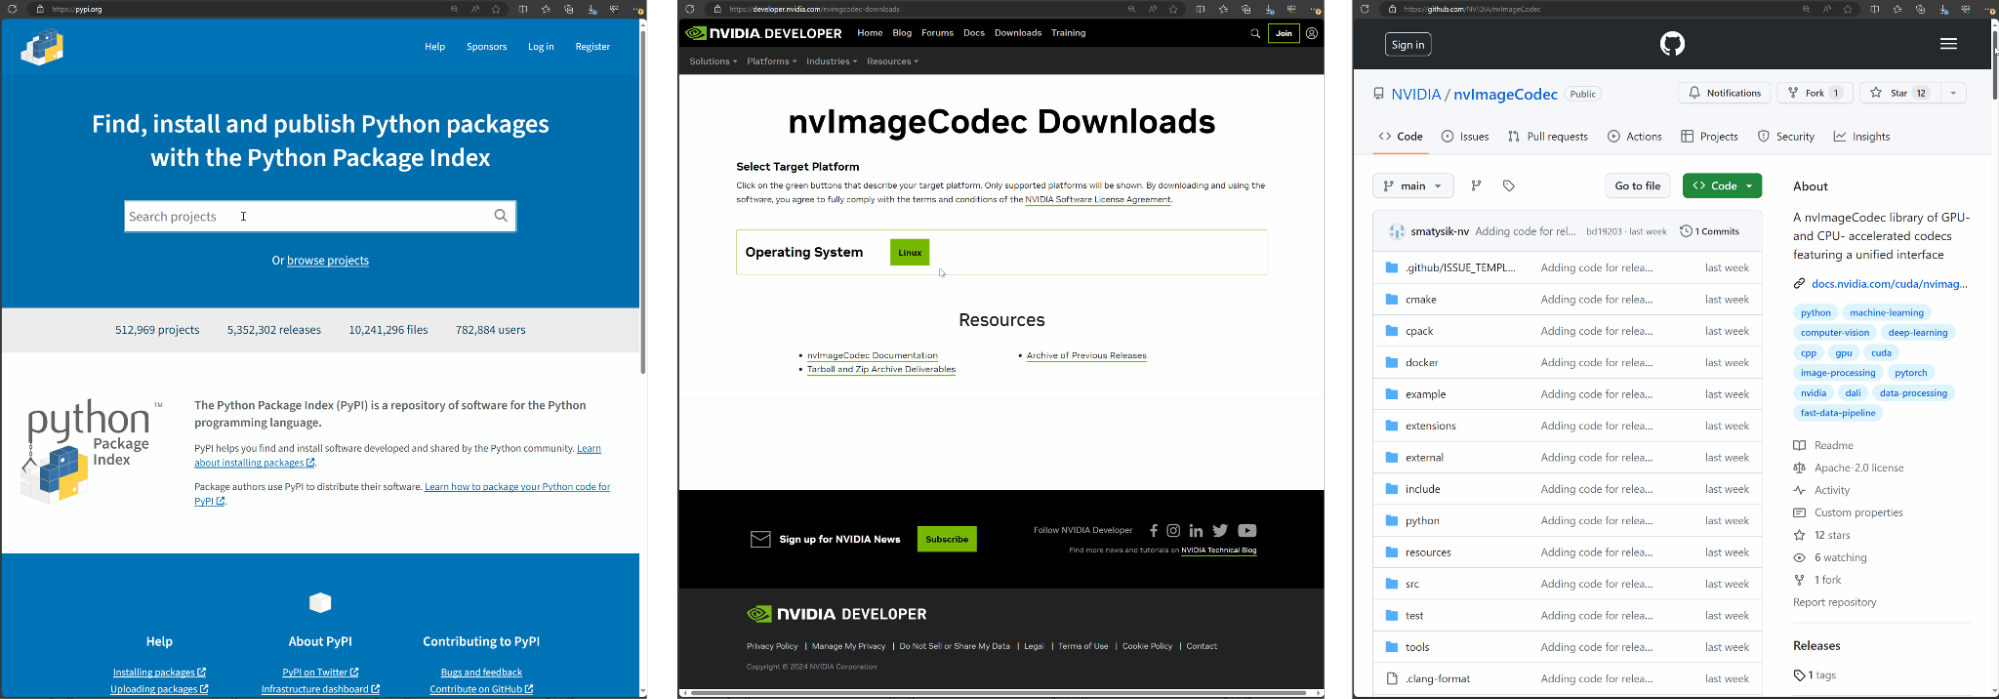 Screenshots of different ways to download the nvImageCodec package: PyPI, the NVIDIA Developer Zone, and the GitHub repo.
